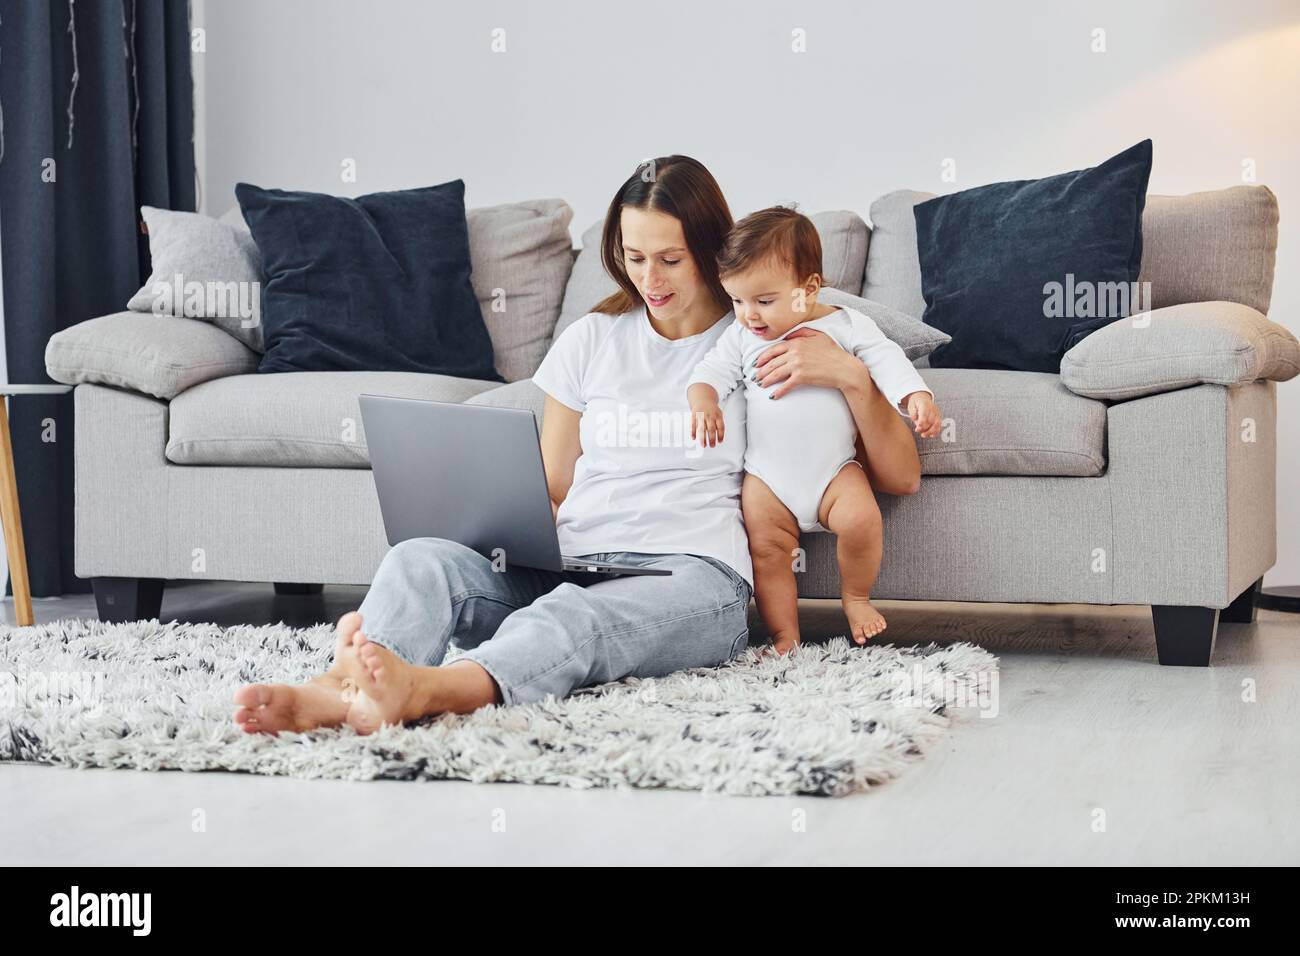 Silver colored laptop. Mother with her little daughter is indoors at home together. Stock Photo